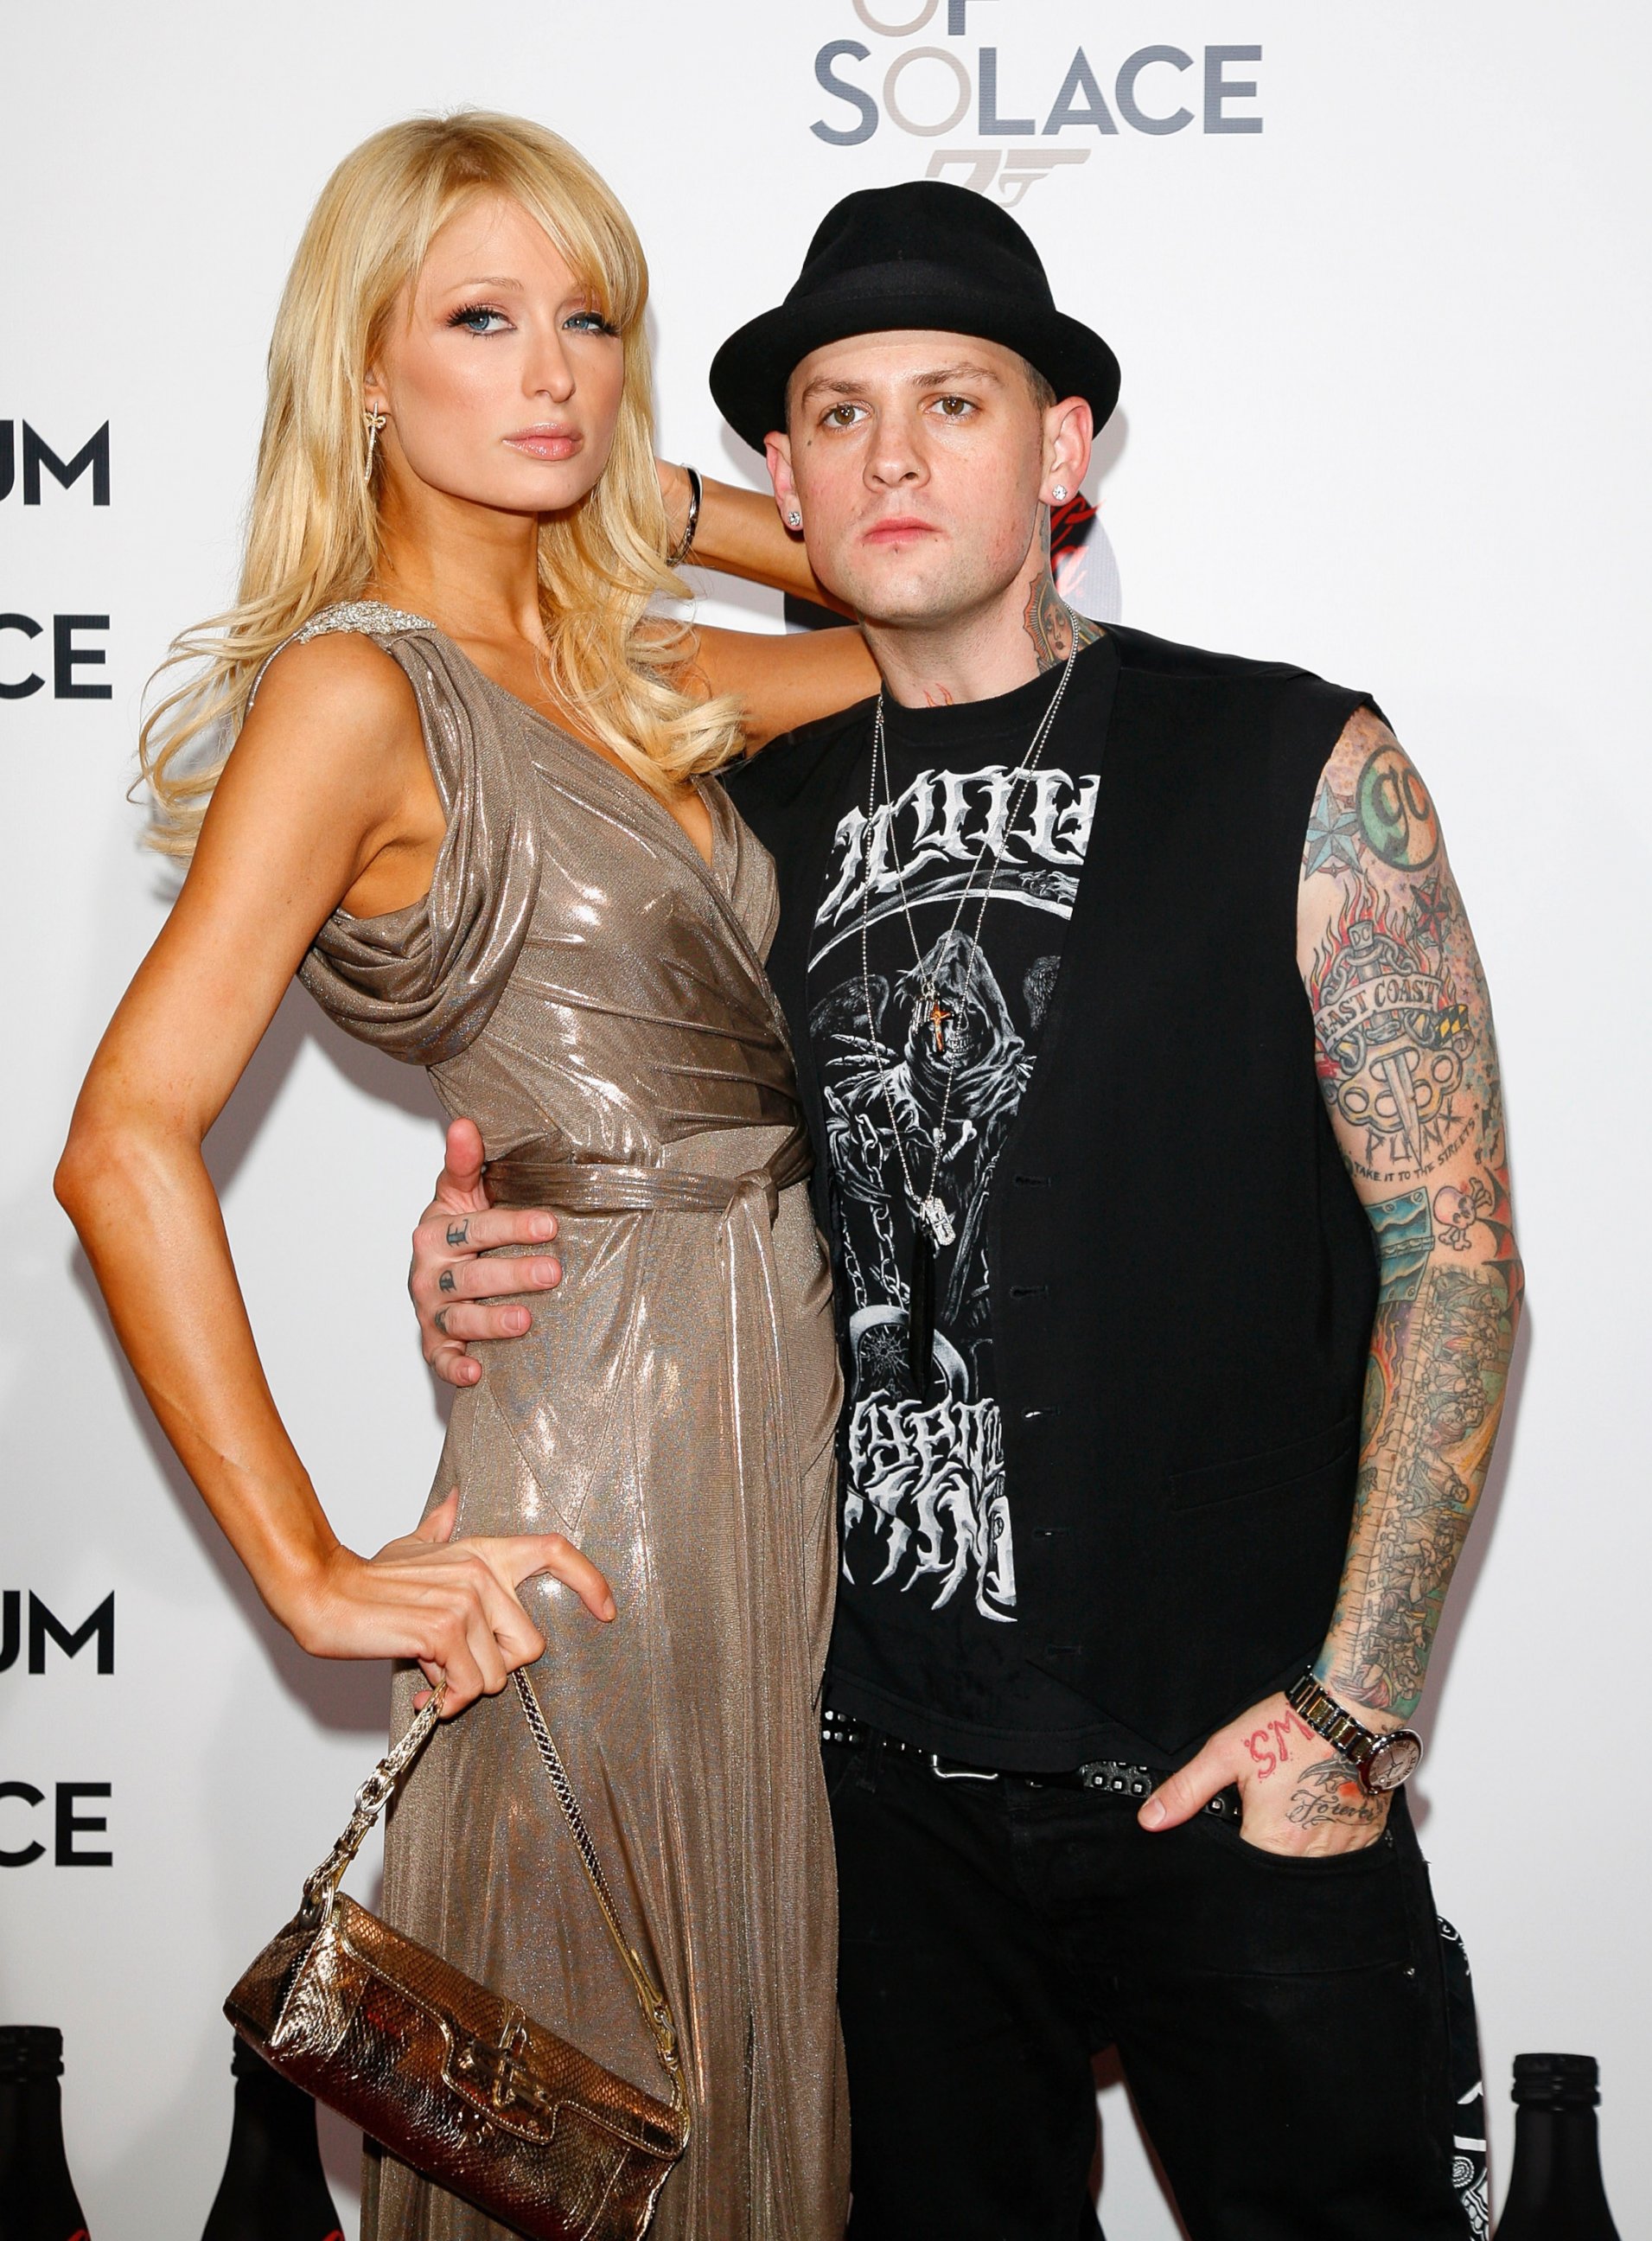 PHOTO: Benji Madden and Paris Hilton are pictured on Nov. 13, 2008 in Los Angeles.